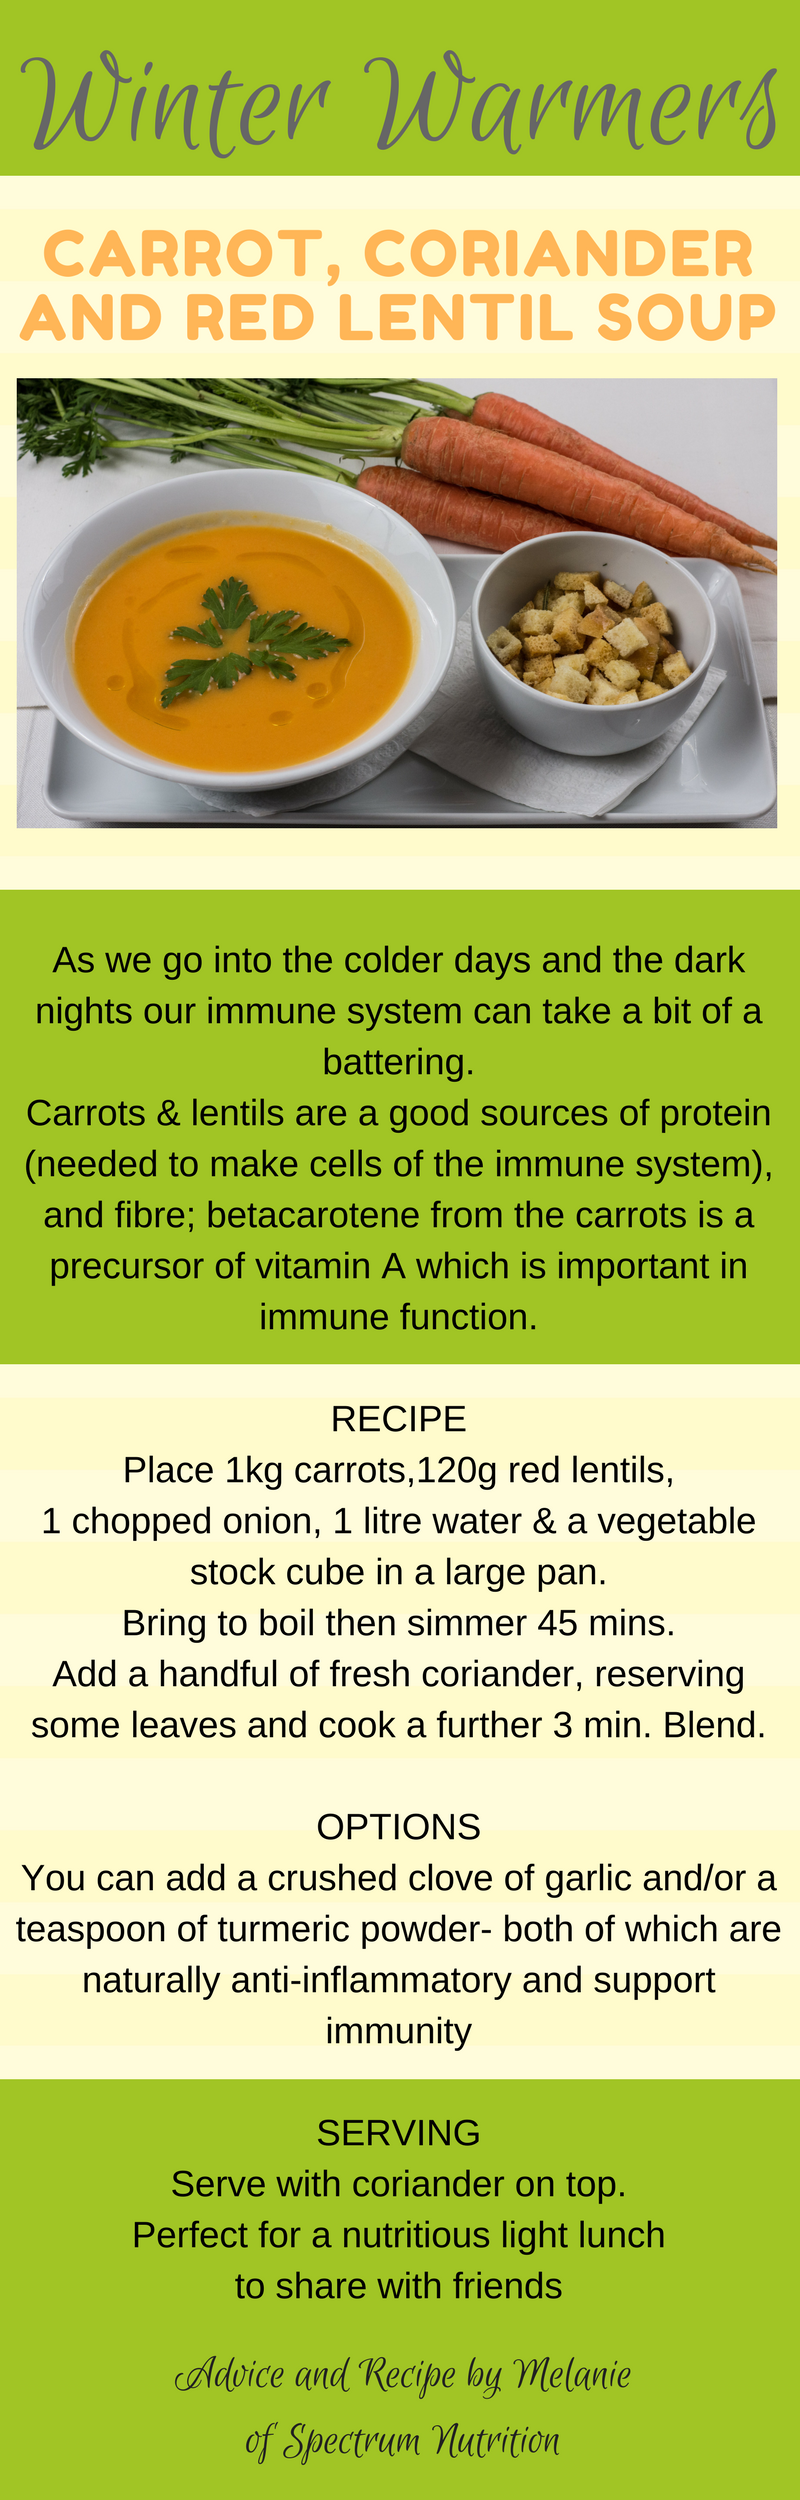 Carrot coriander and lentil soup recipe infographic